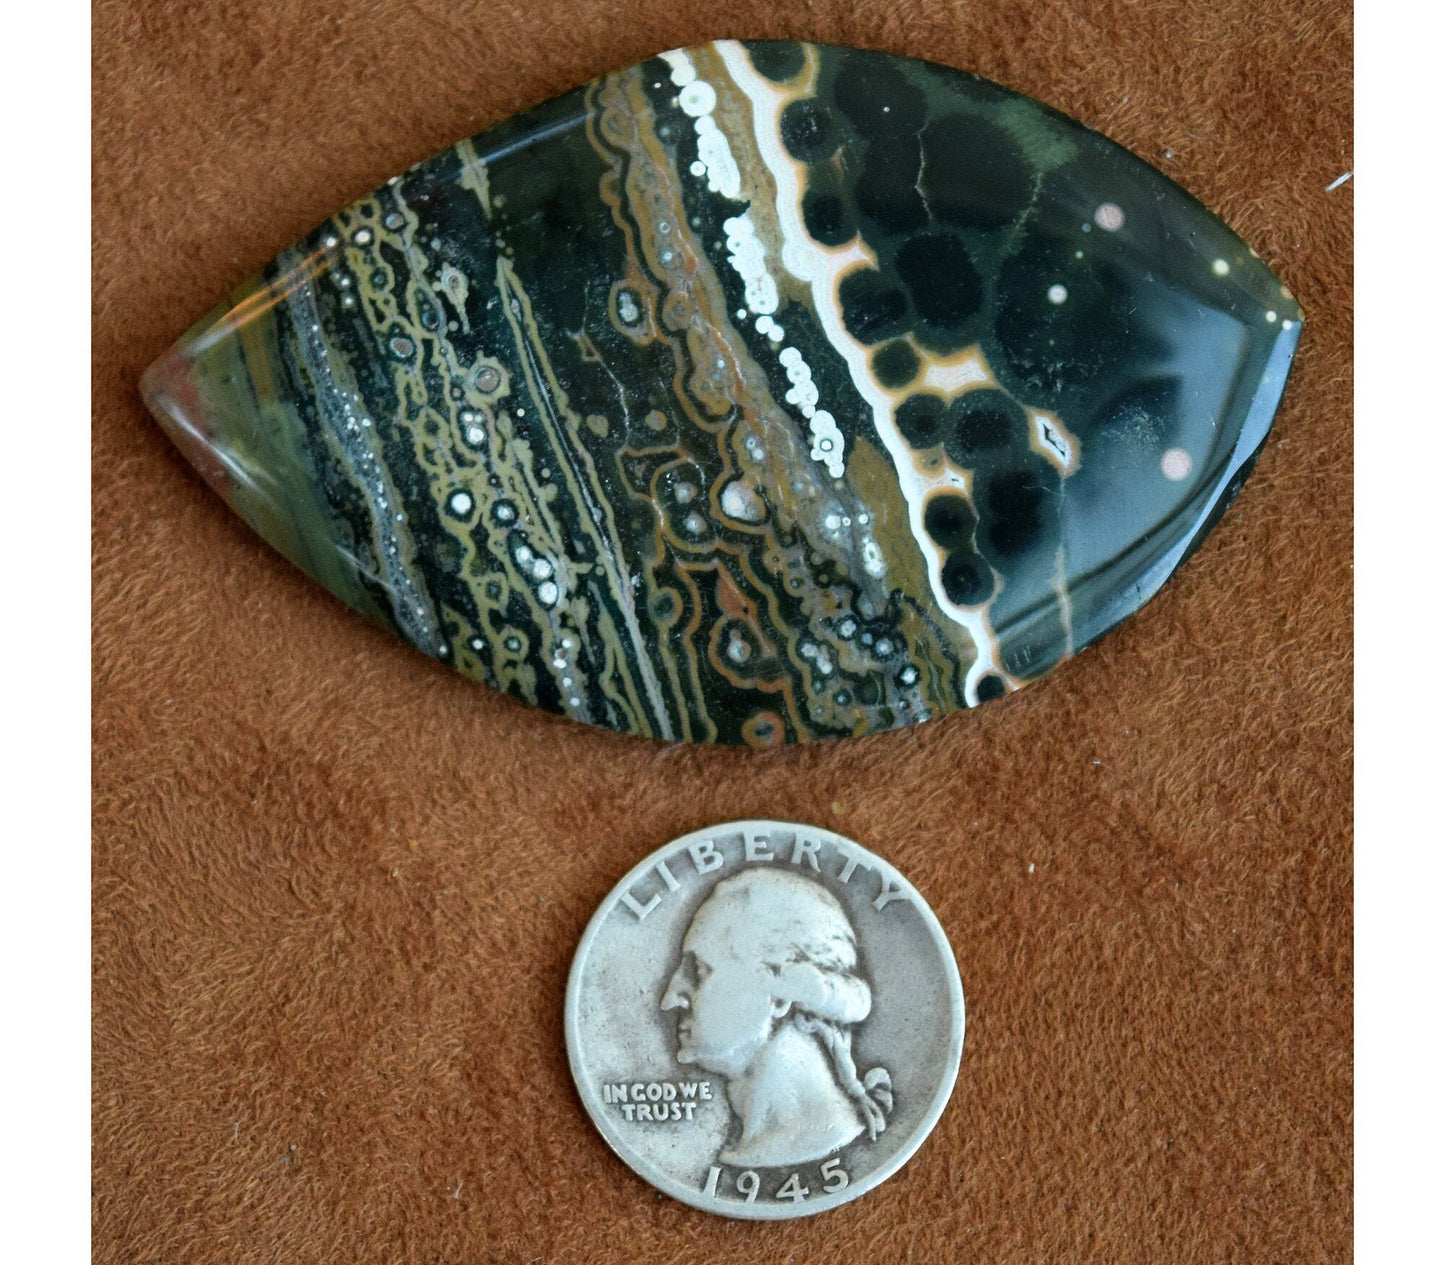 EXTREMELY RARE! HUGE Ocean Jasper collector&#39;s gem from decades ago! Stone #6 of 6